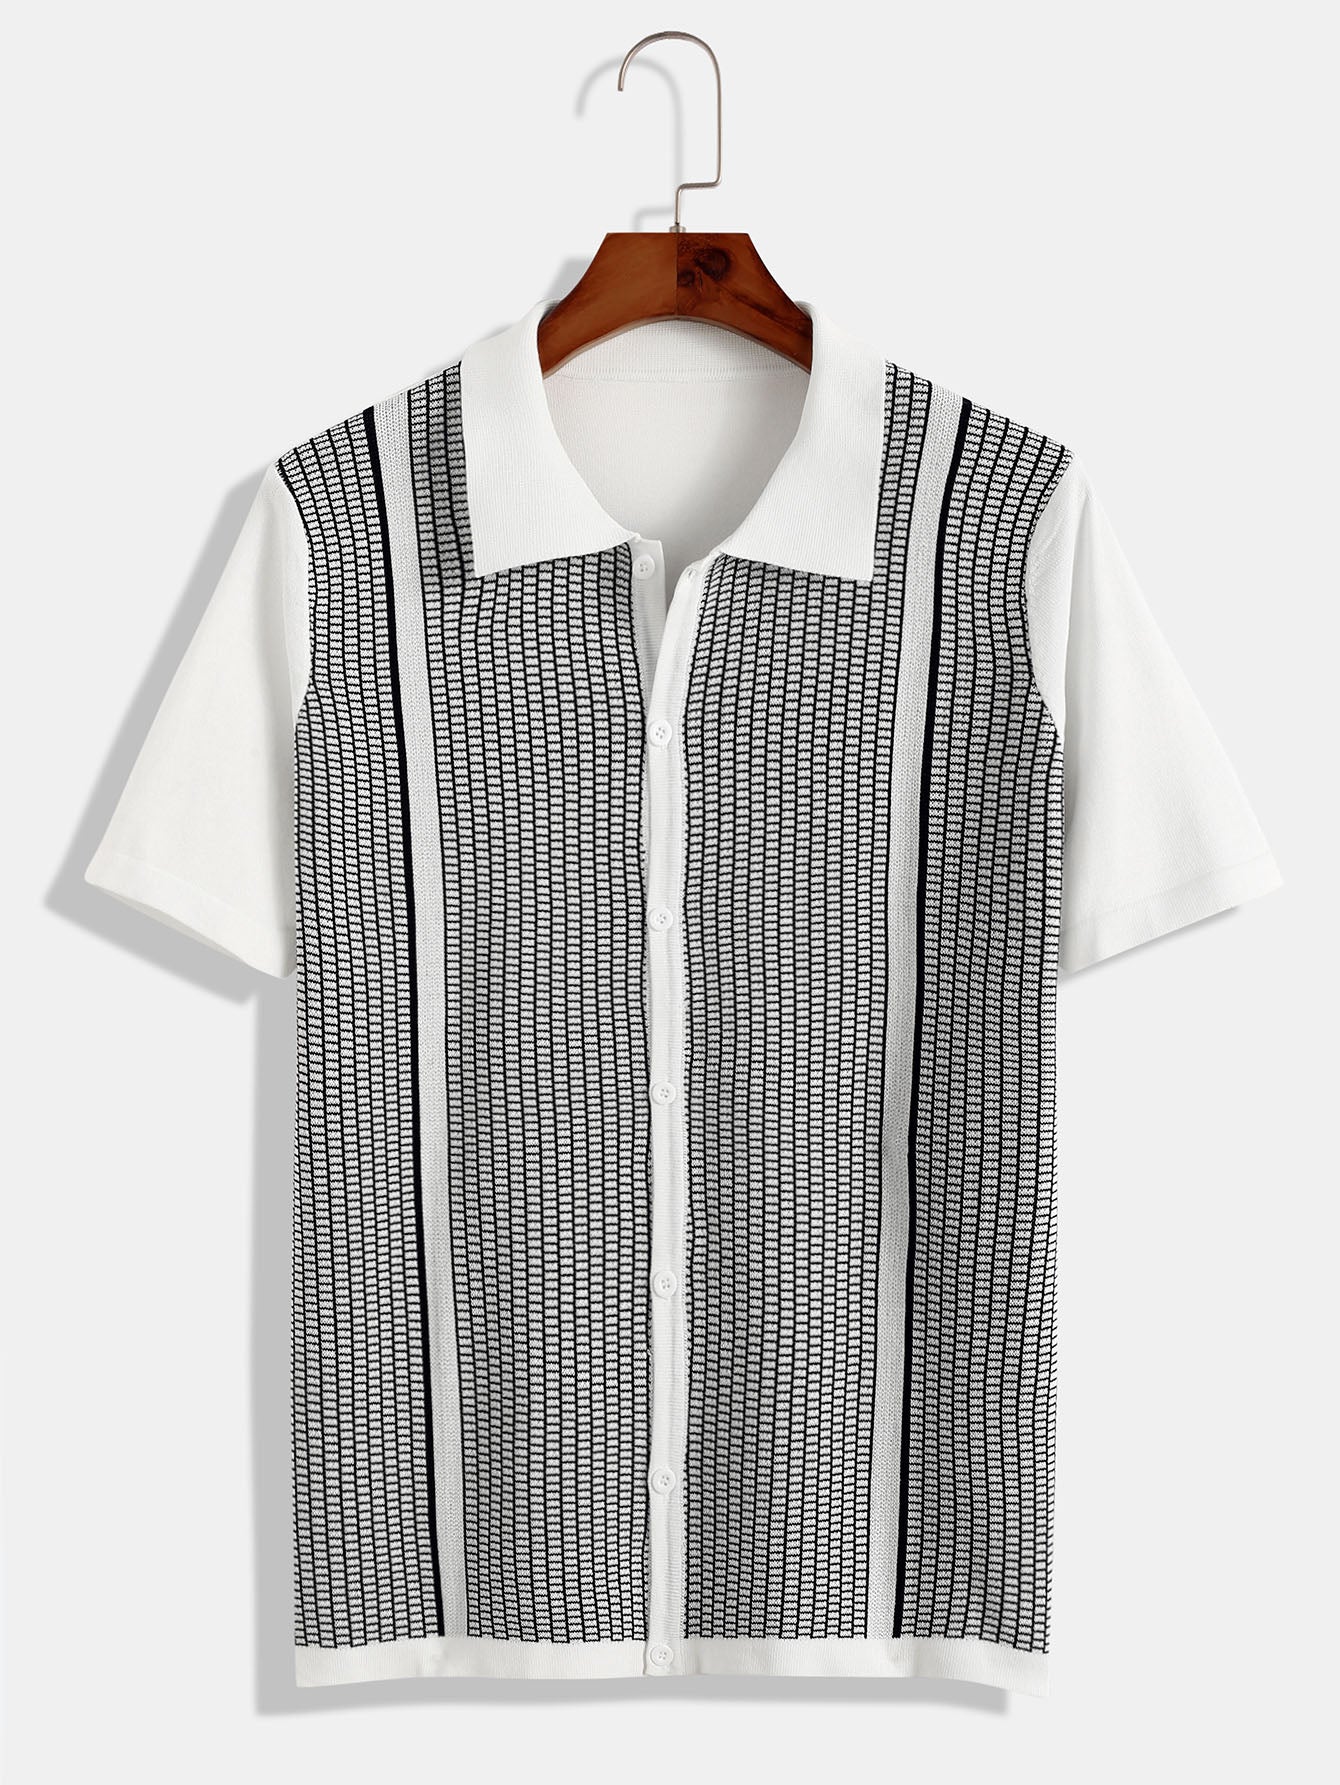 Men Knitted Black and White Striped Short Sleeve Button Up Shirt